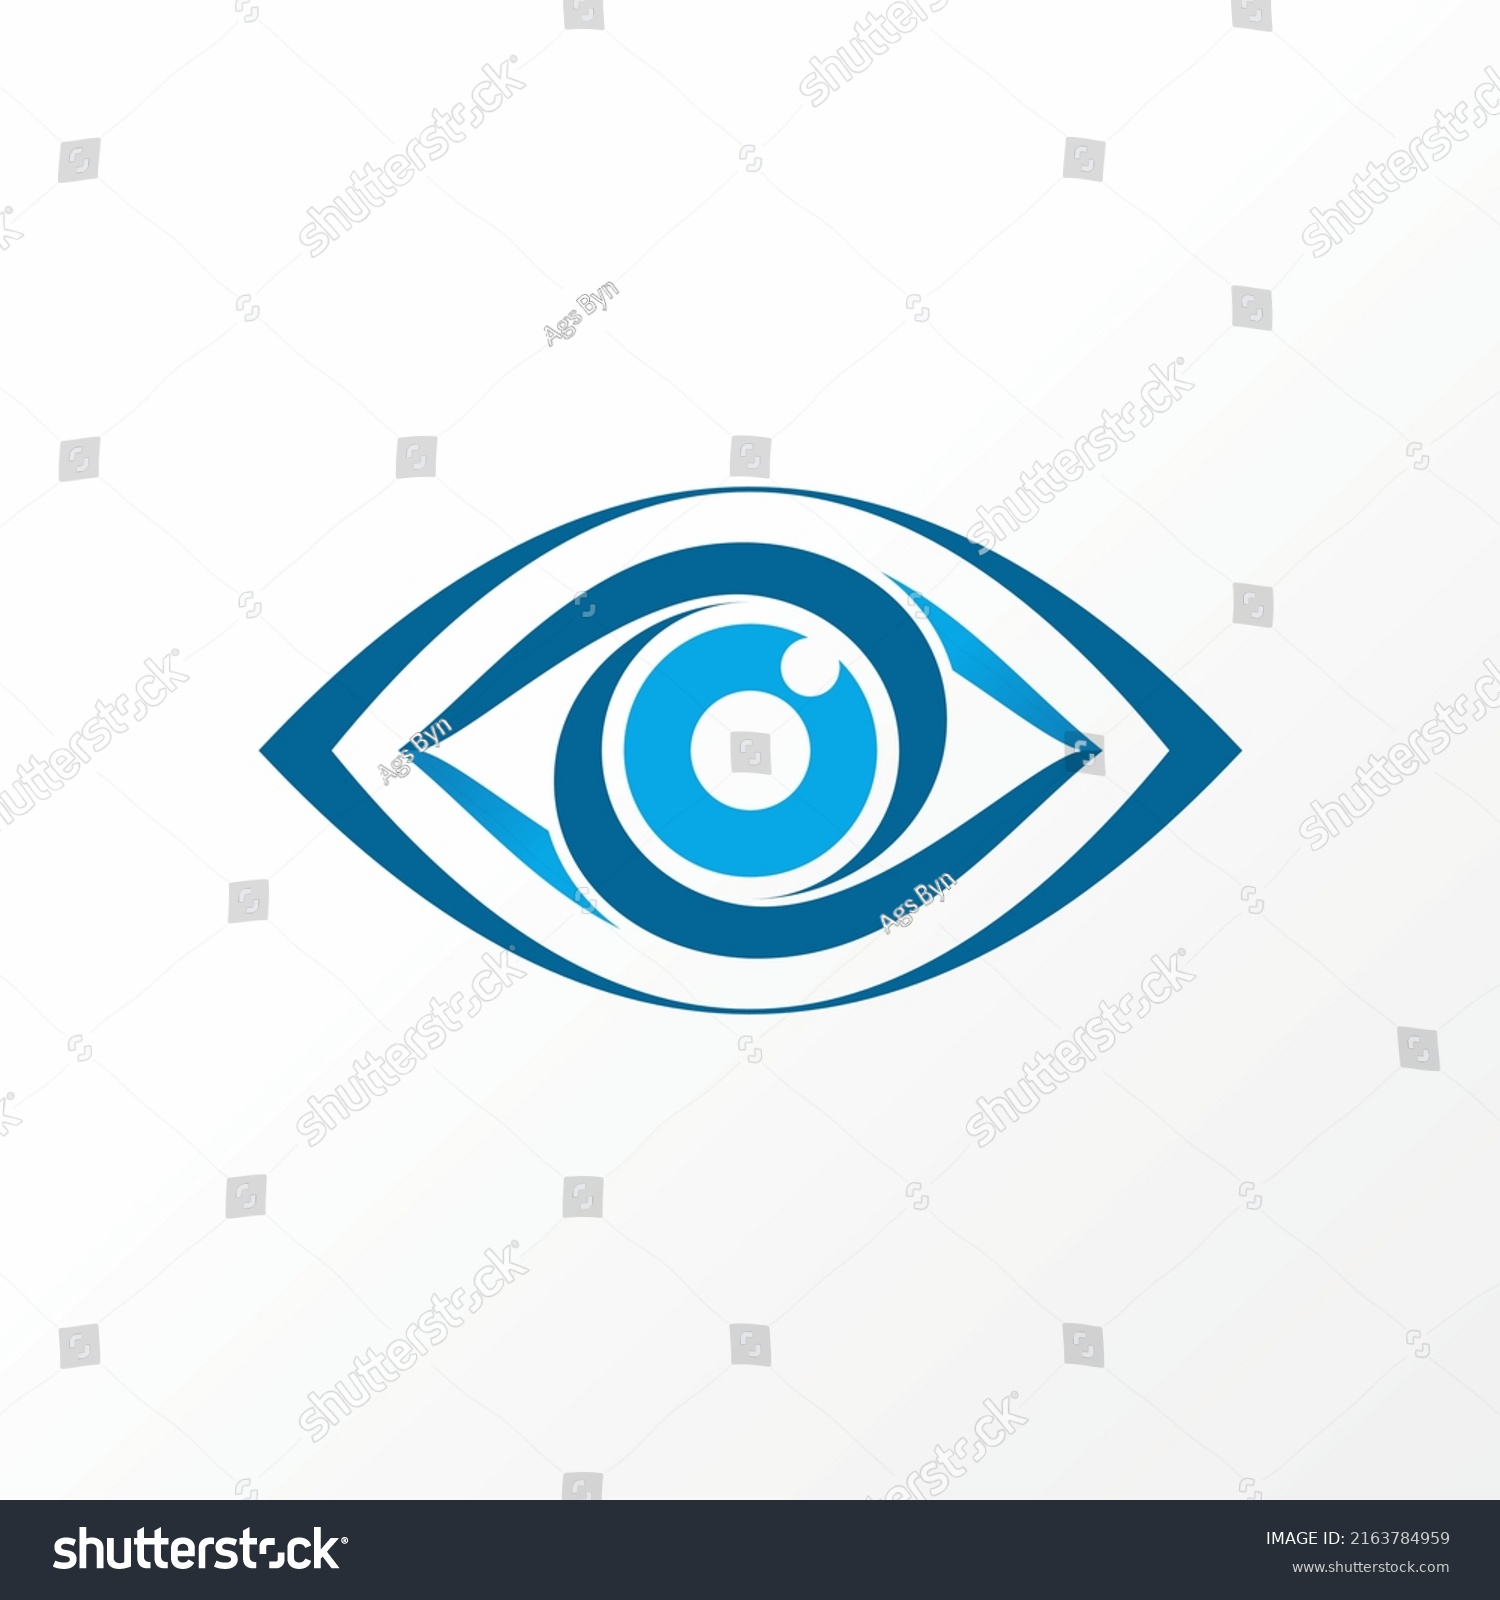 Very unique but simple flip or backword line art out eye on ellipse image graphic icon logo design abstract concept vector stock. Can be used as a symbol related to health or focus #2163784959